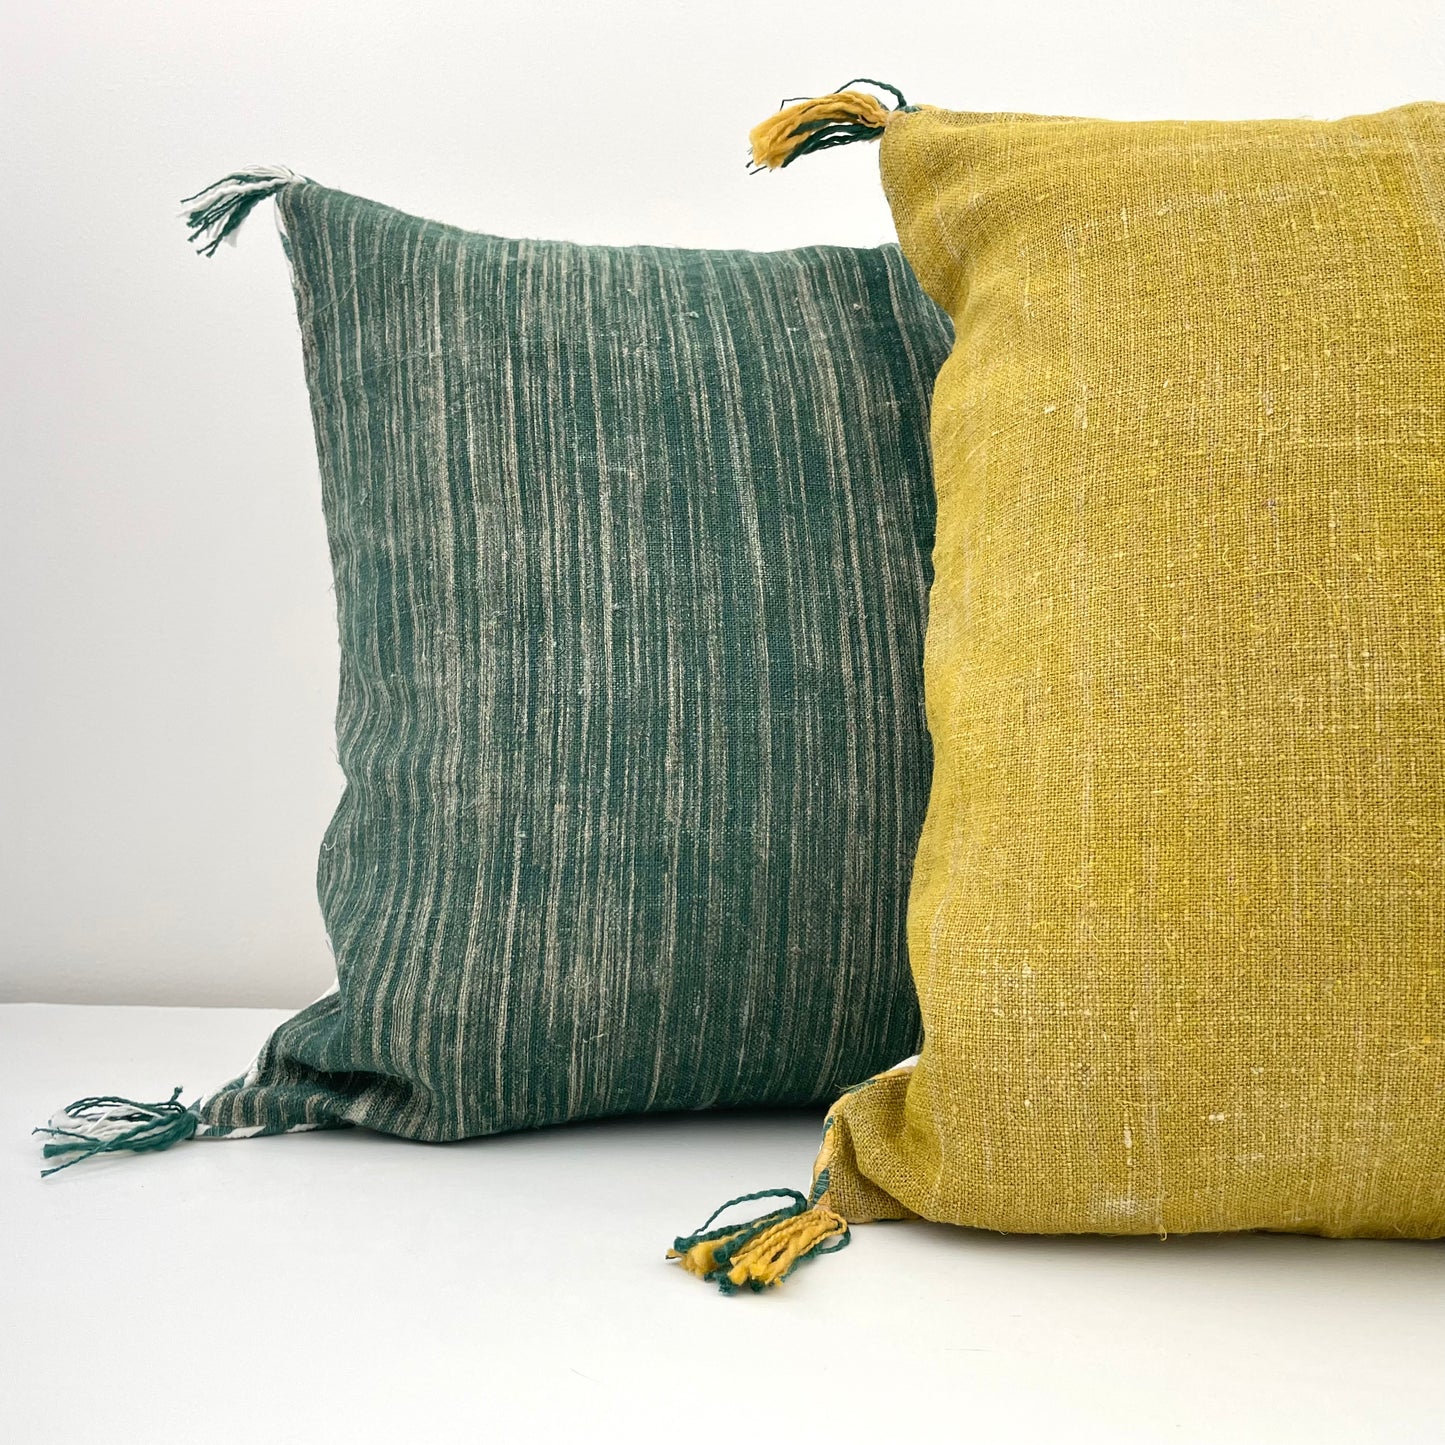 mustard yellow linen 18x18 square pillow cover with striped edging and tassels